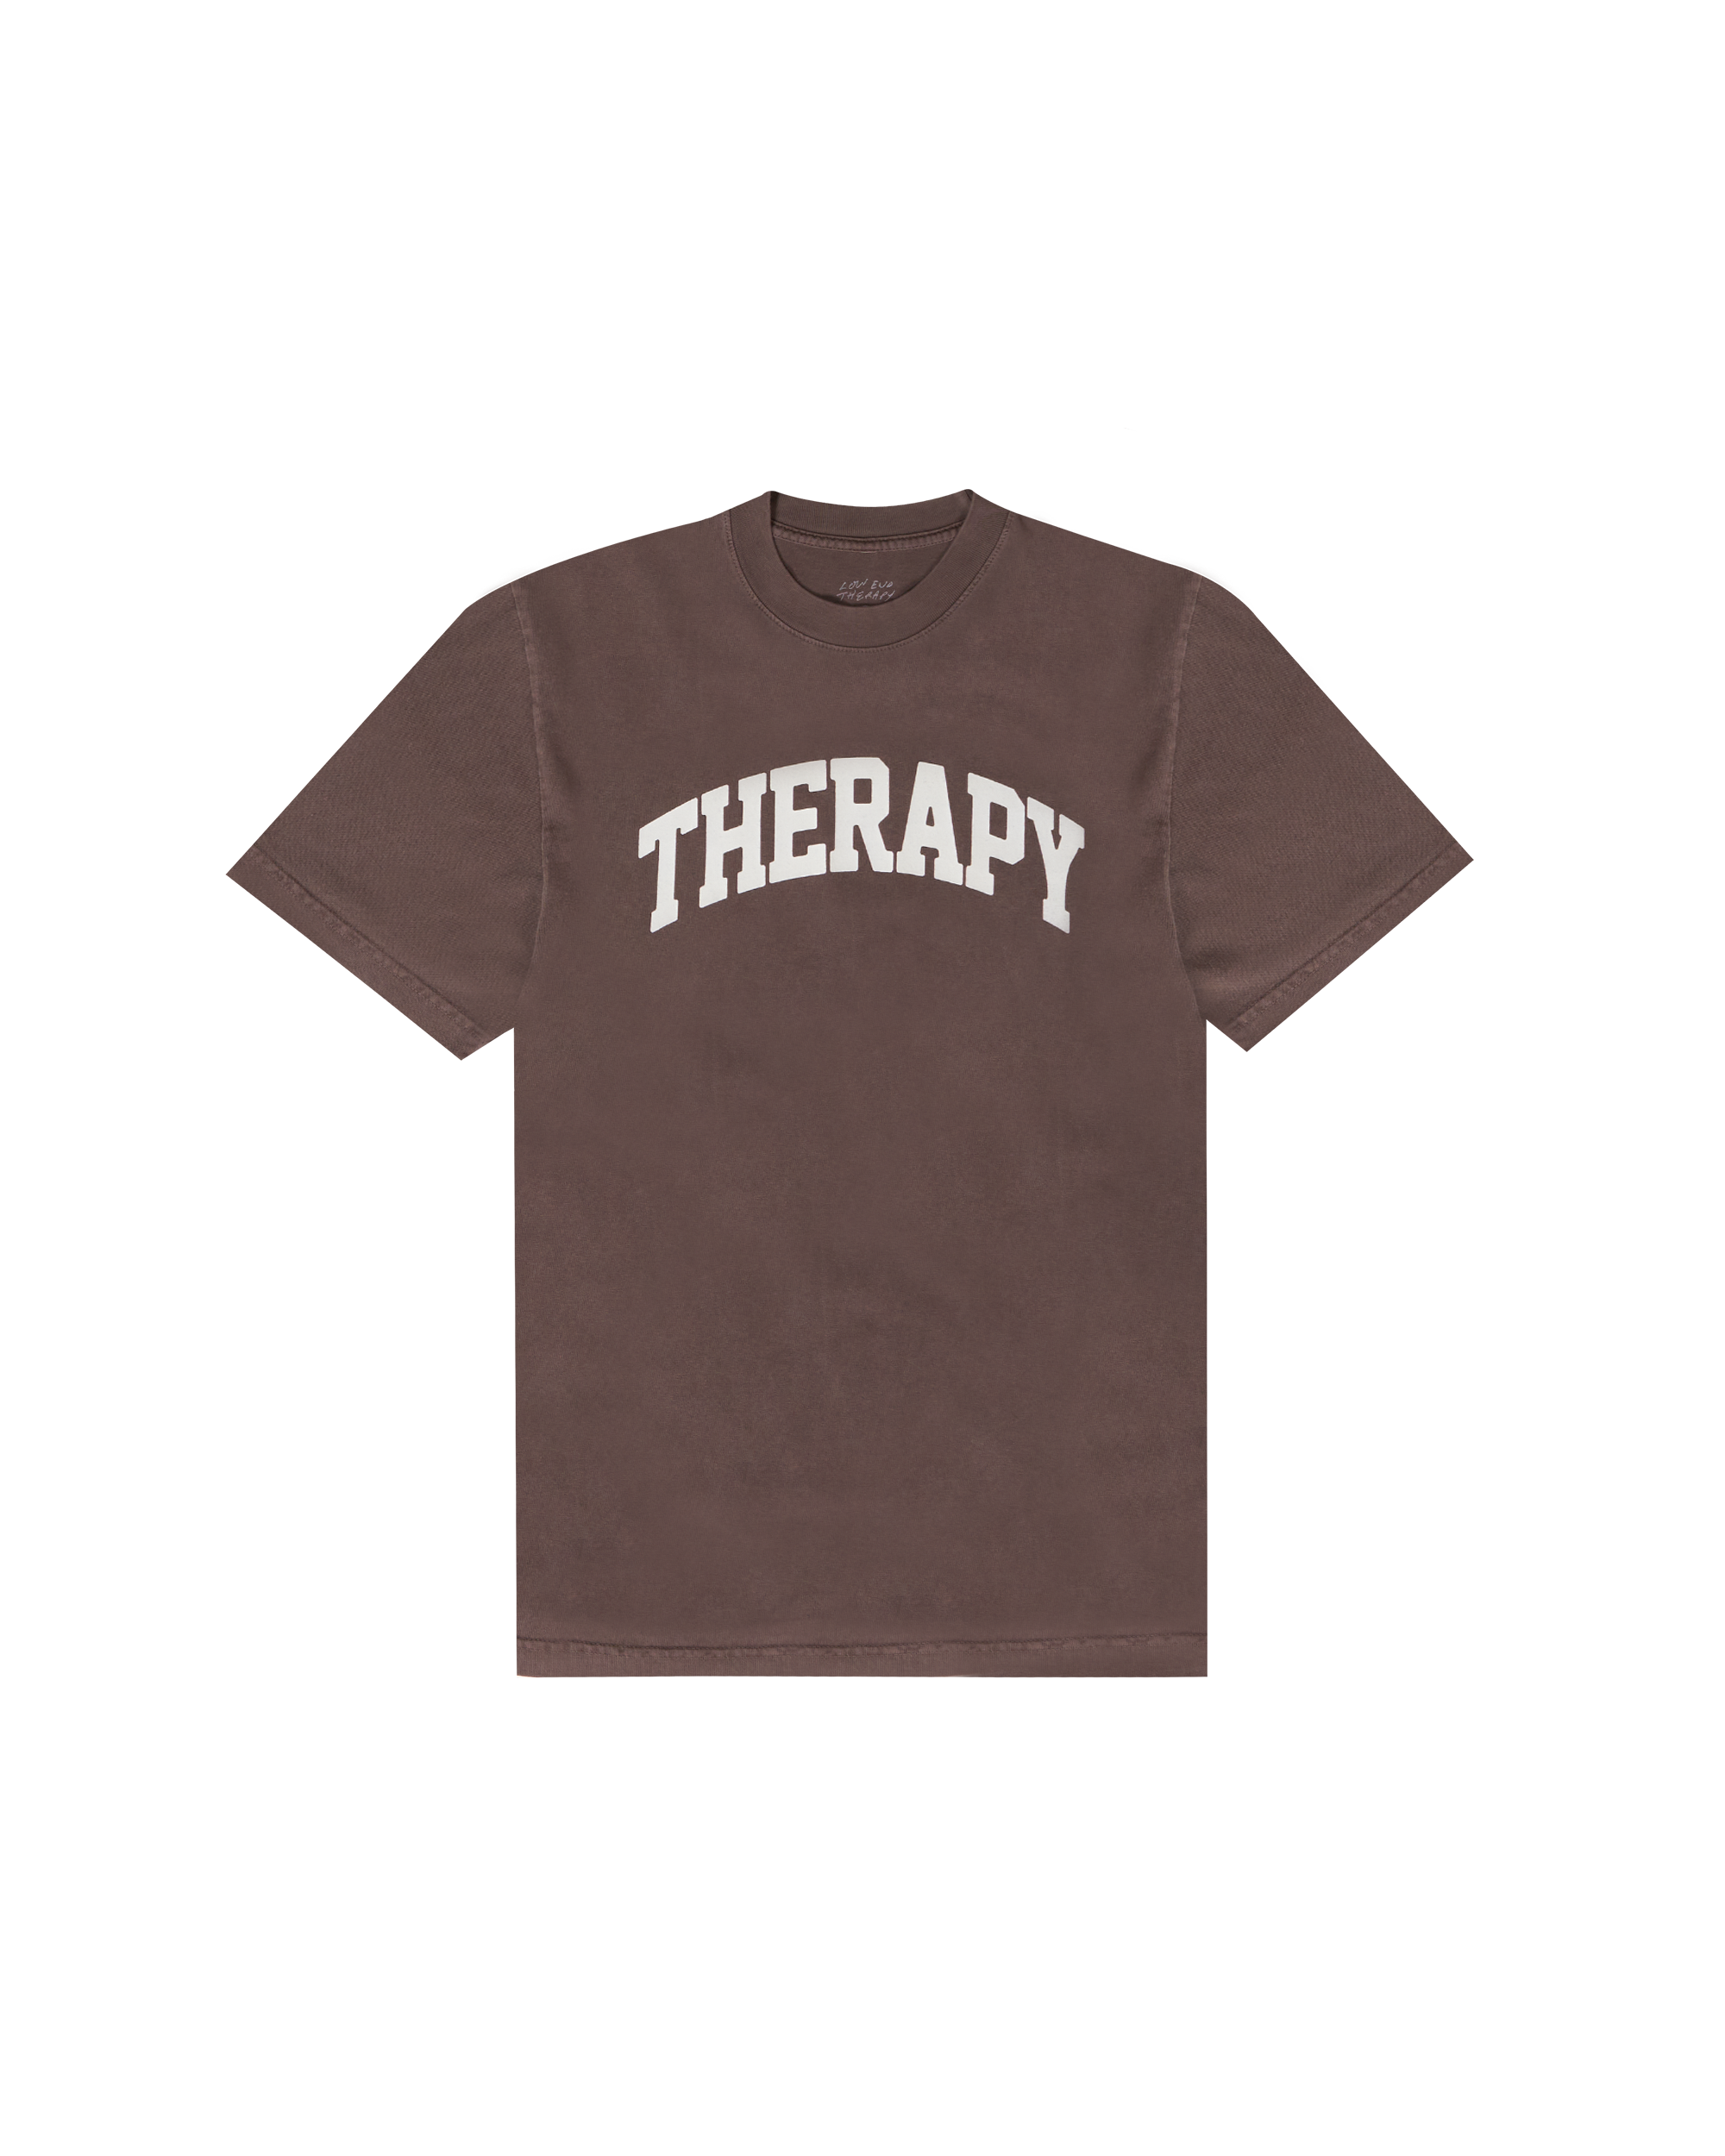 Therapy "Free Association" T-shirt - Clove